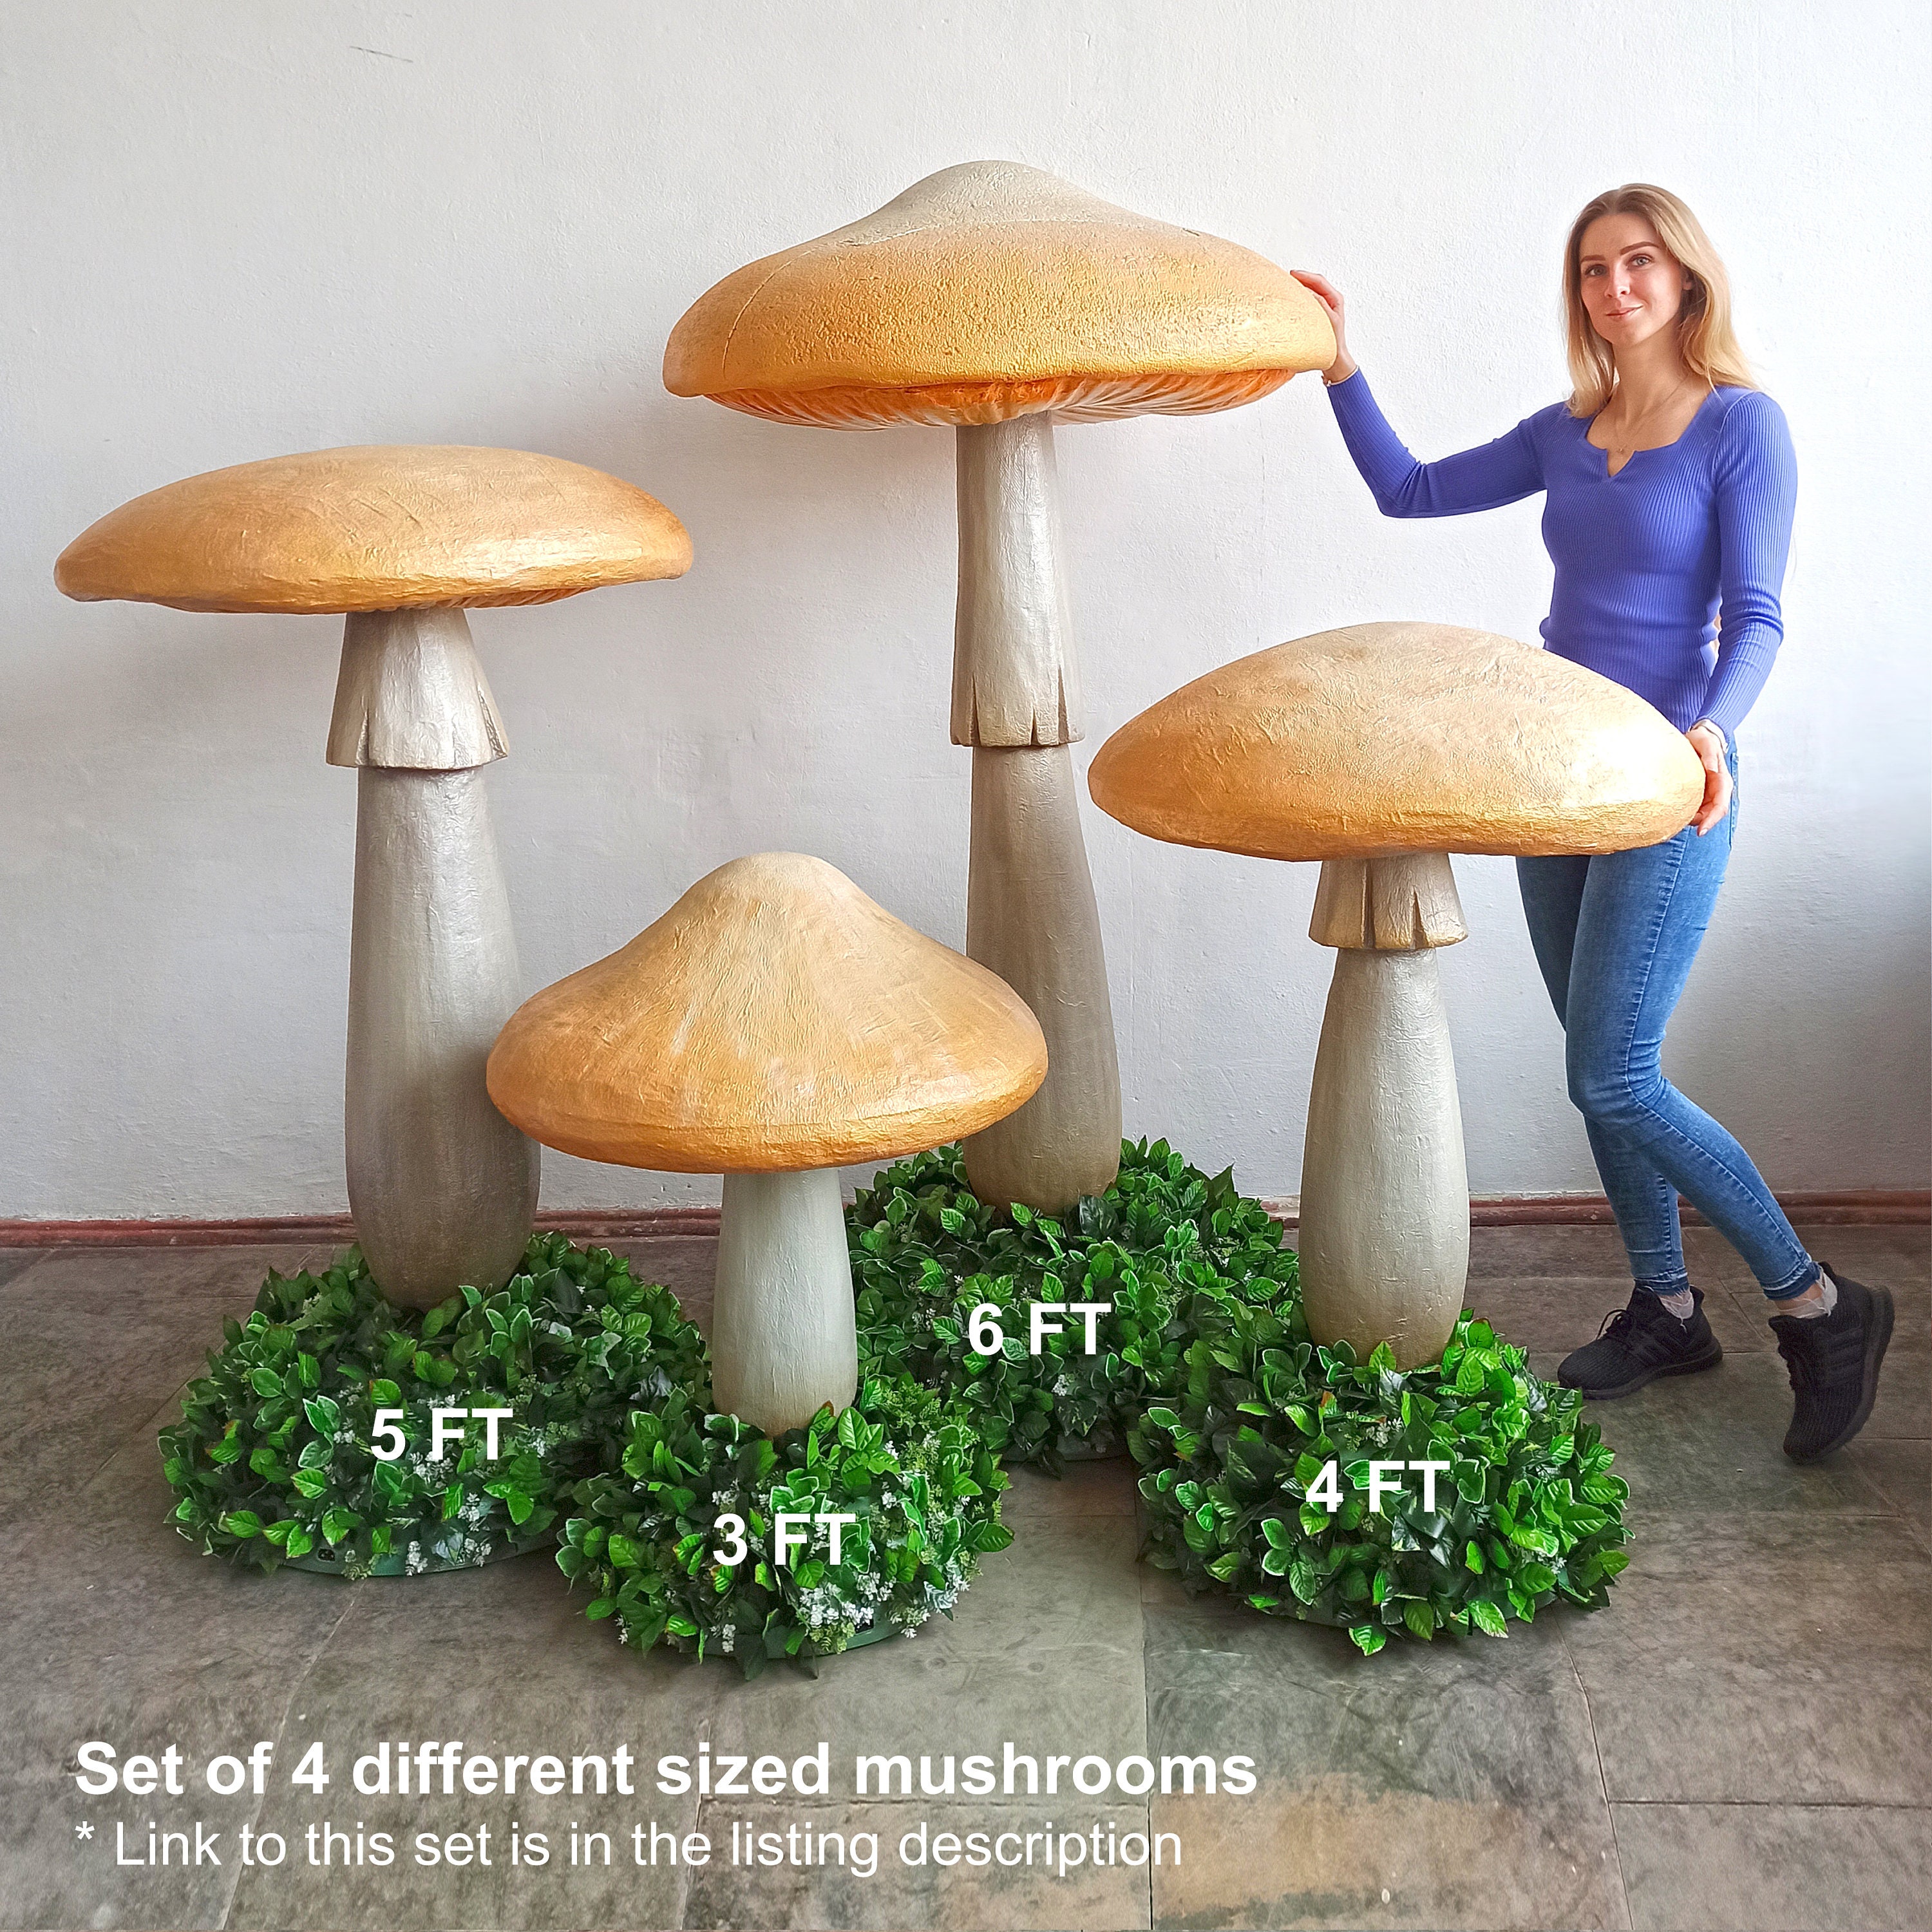 Faux Fungi Toadstools & Mushrooms, up to 13 cm tall by 6 cm